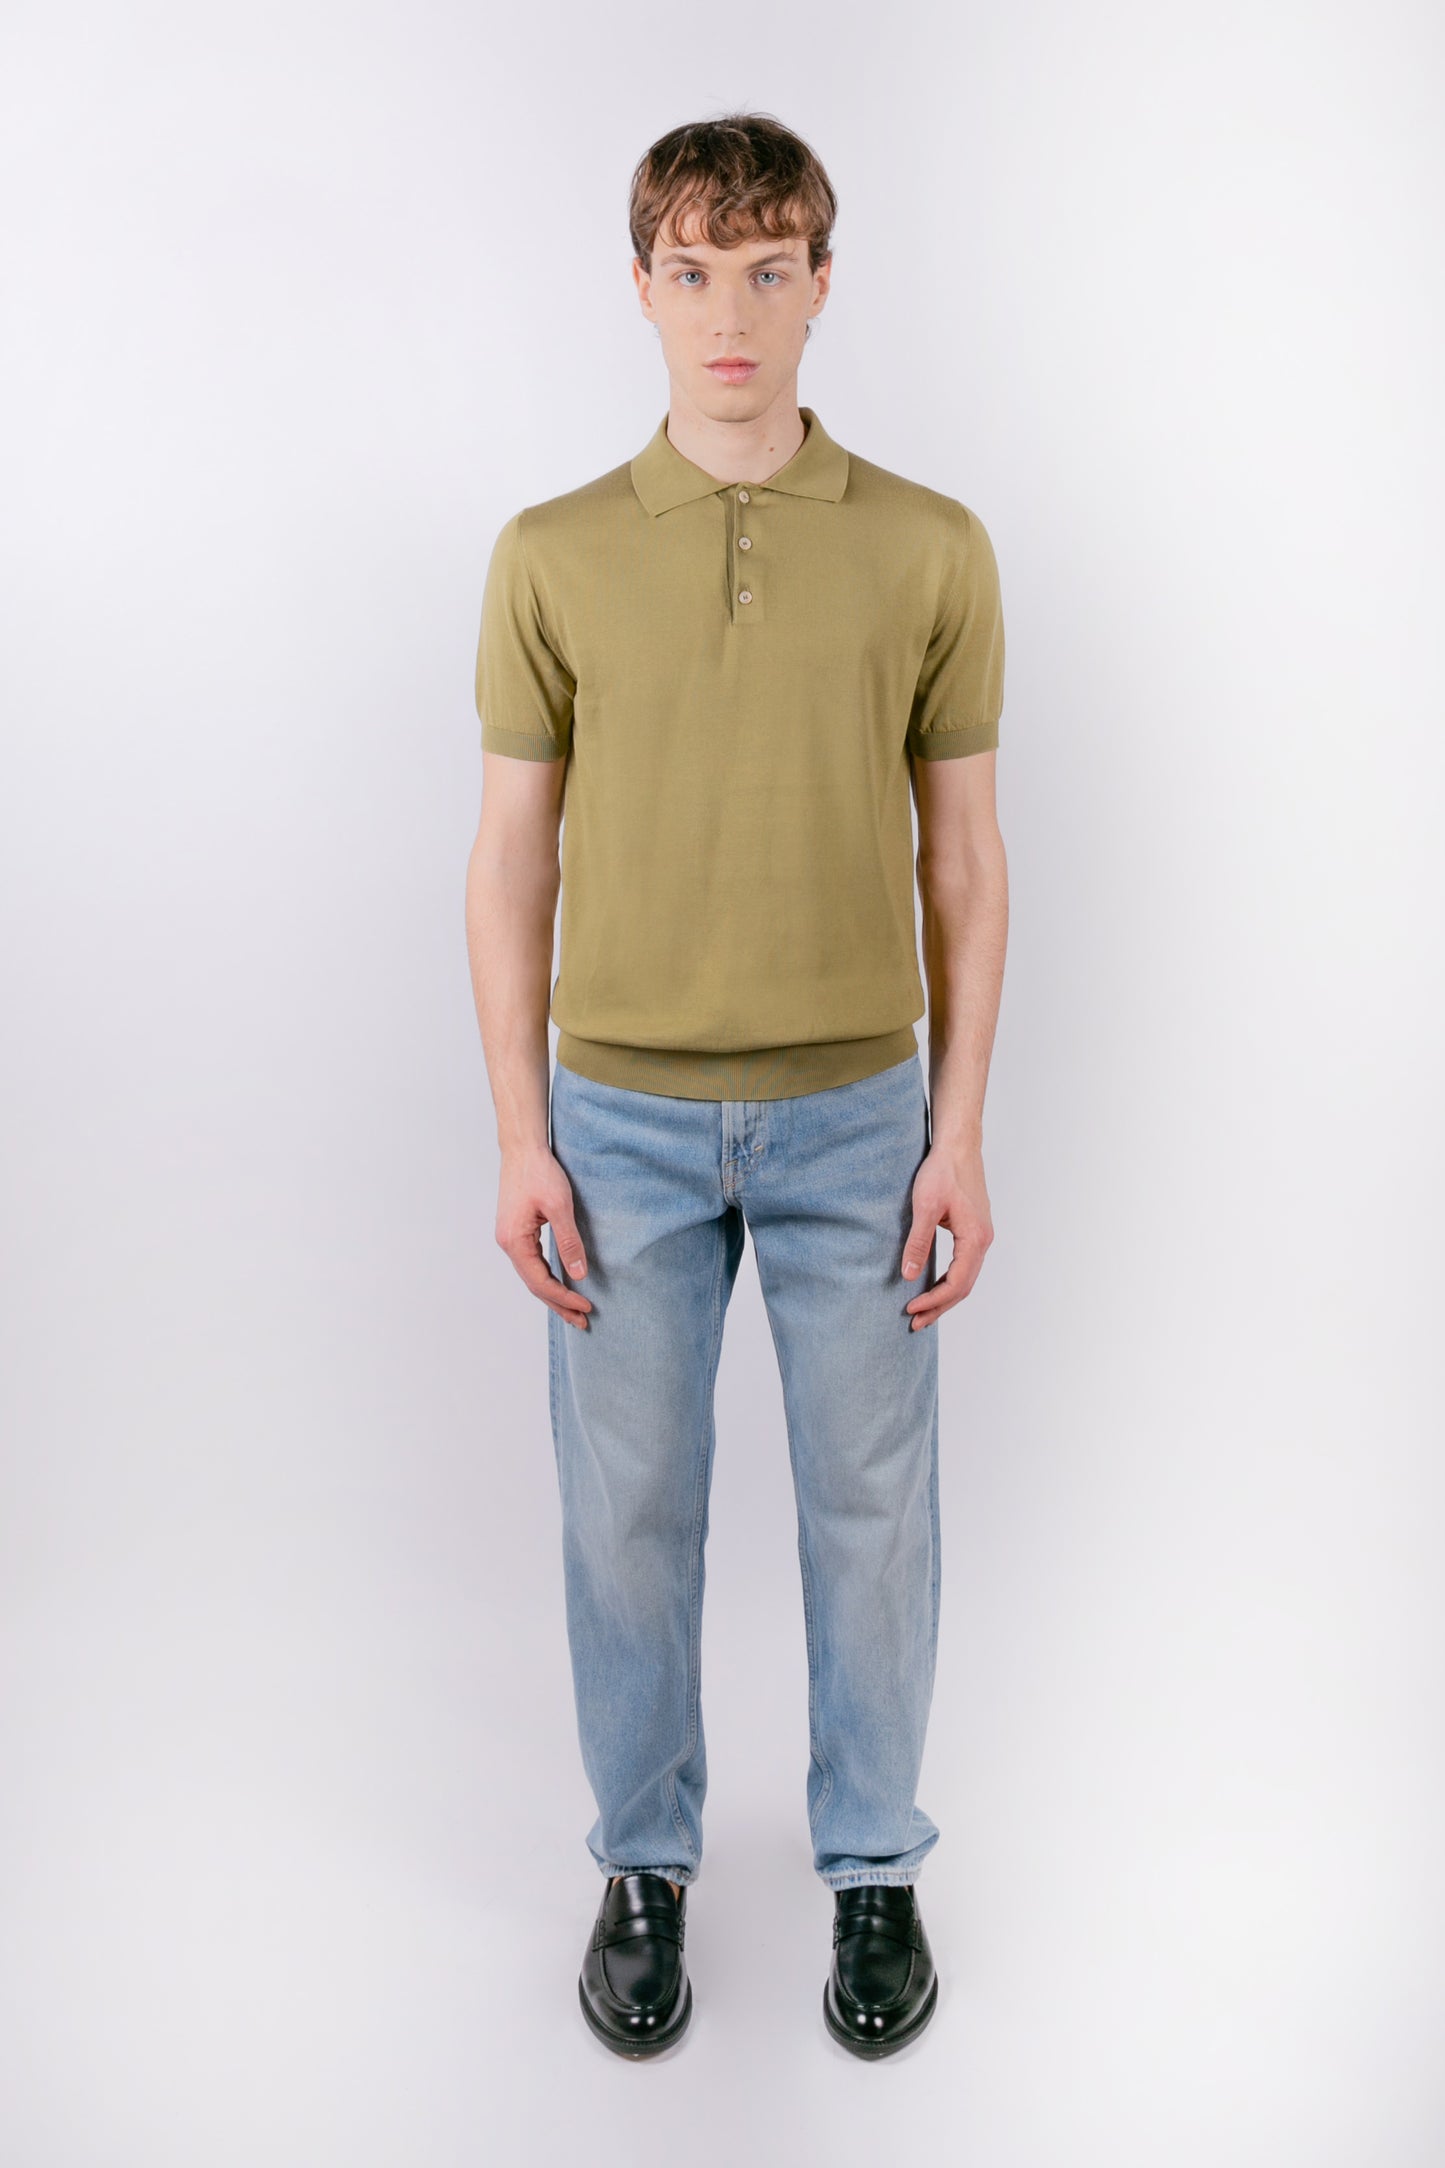 Short-sleeved green polo shirt in cotton